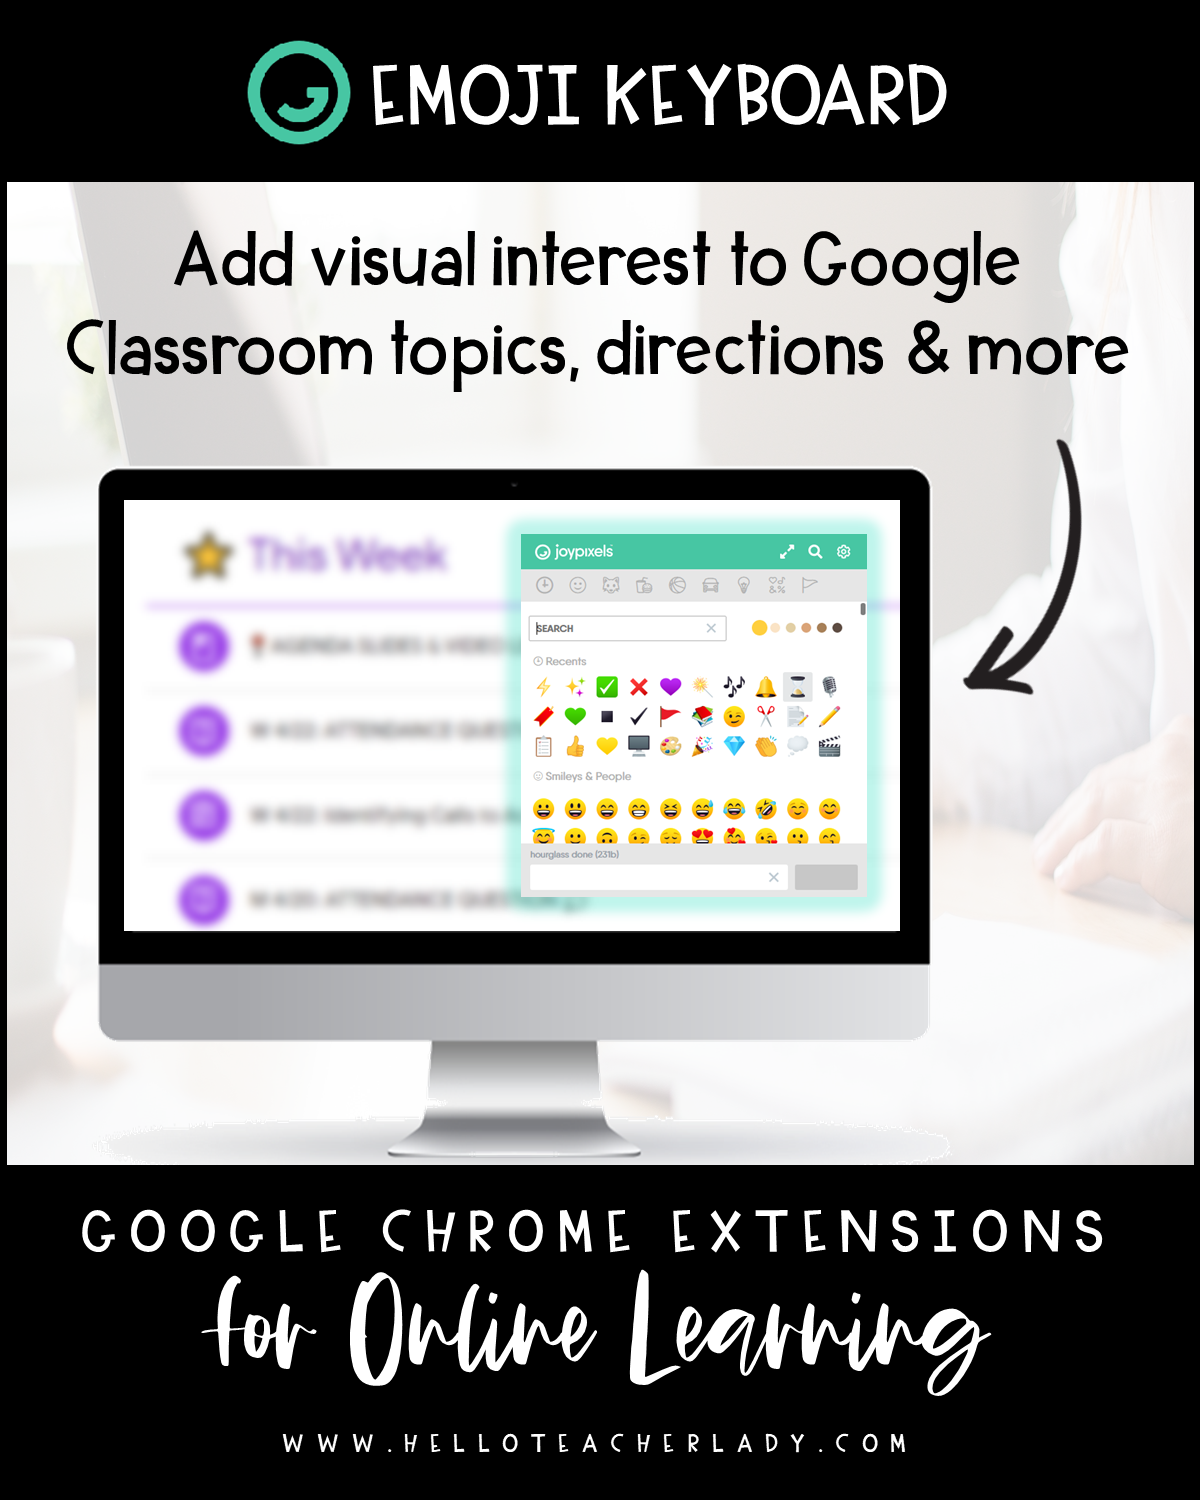 5 Helpful Google Chrome Extensions For Online Distance Learning